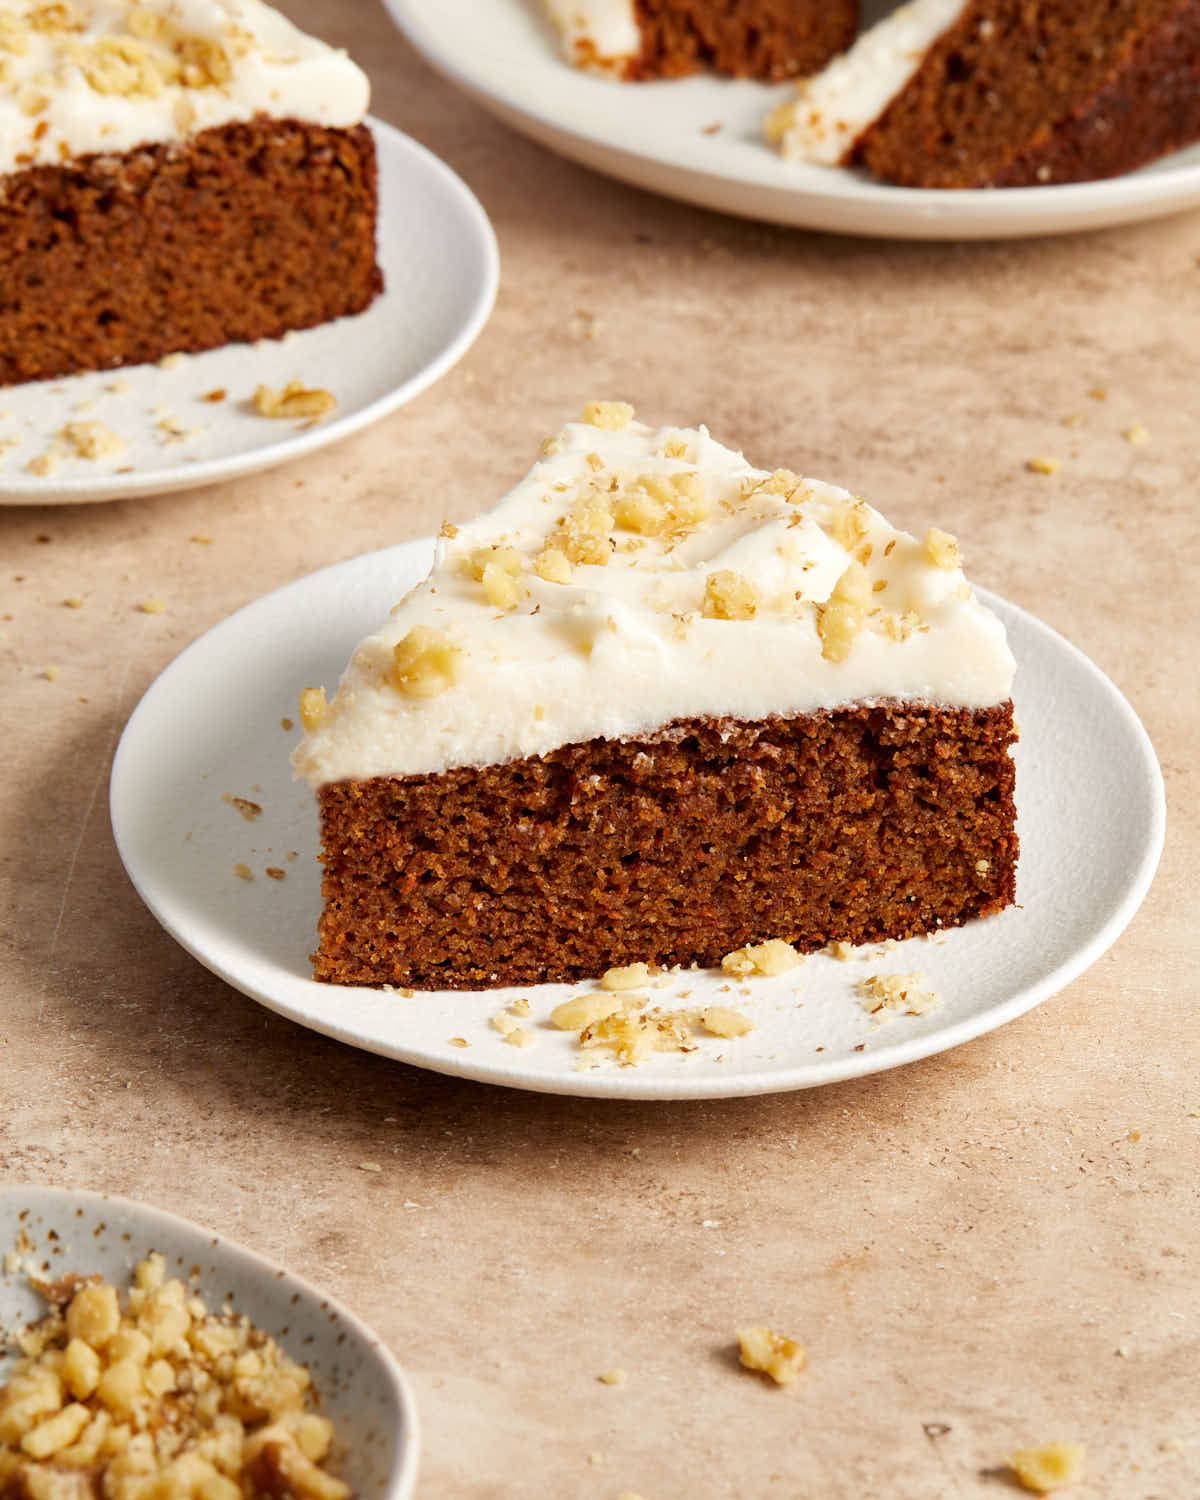 Side view of a slice of carrot cake on a white plate with more slices in the background.